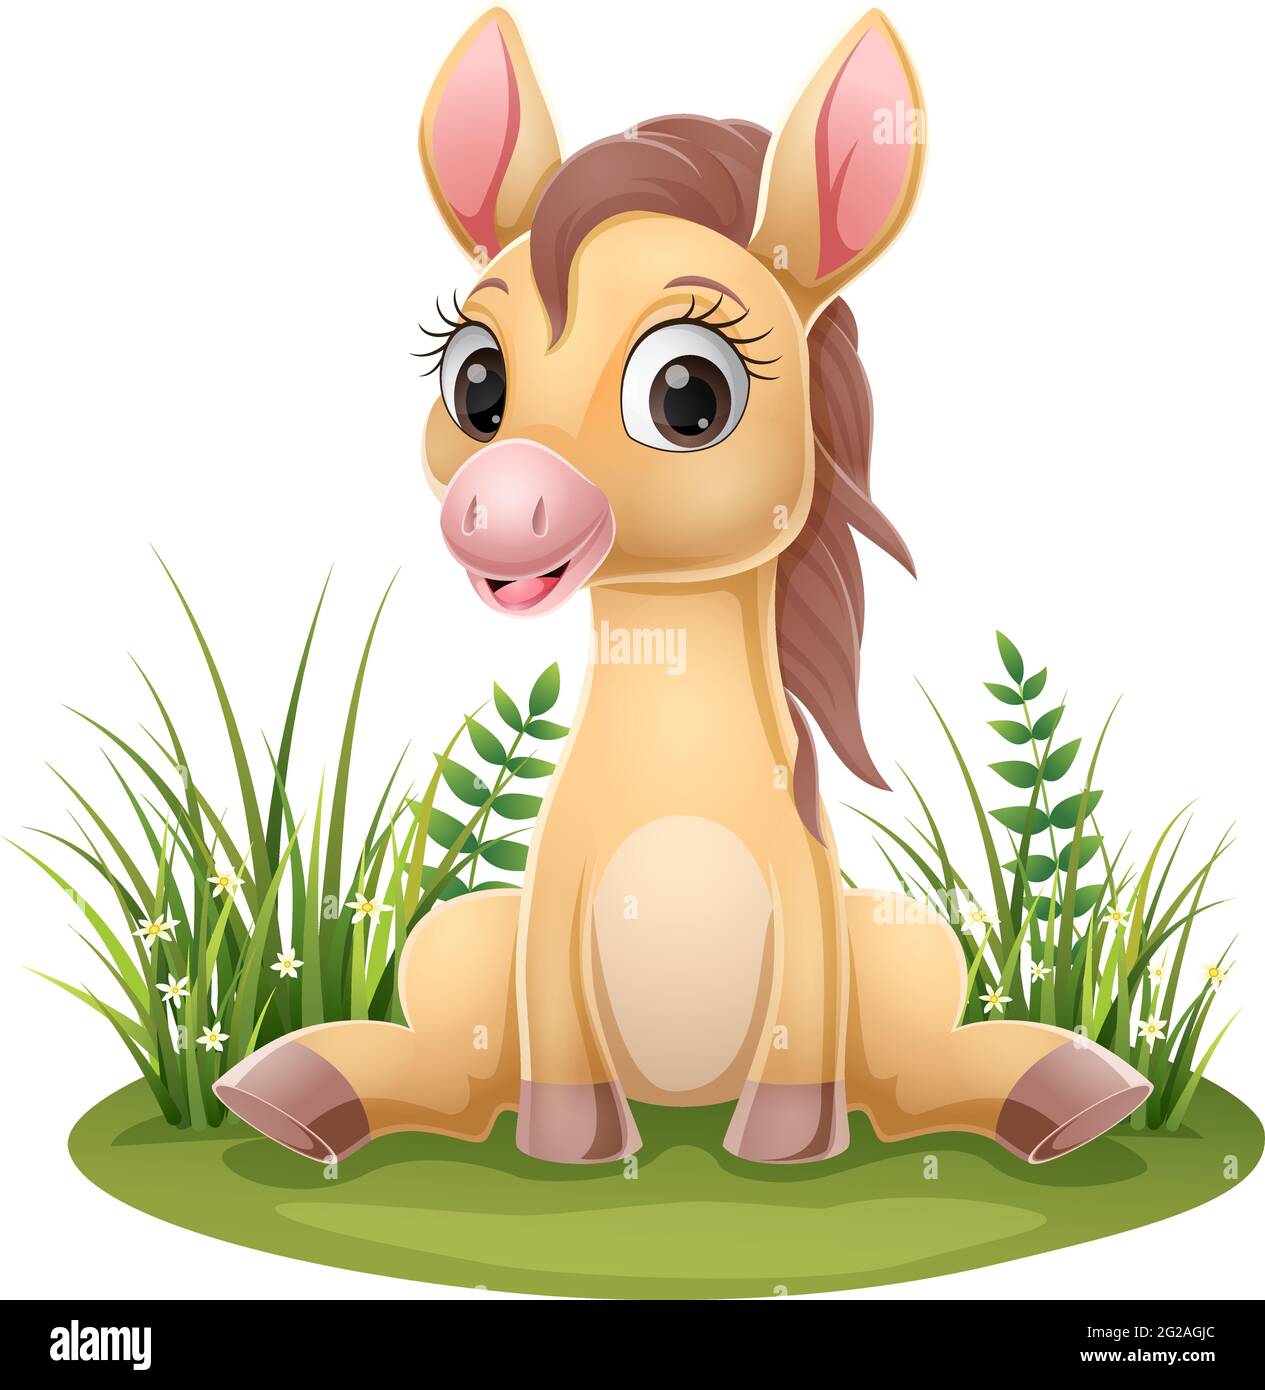 Cartoon baby horse sitting in the grass Stock Vector